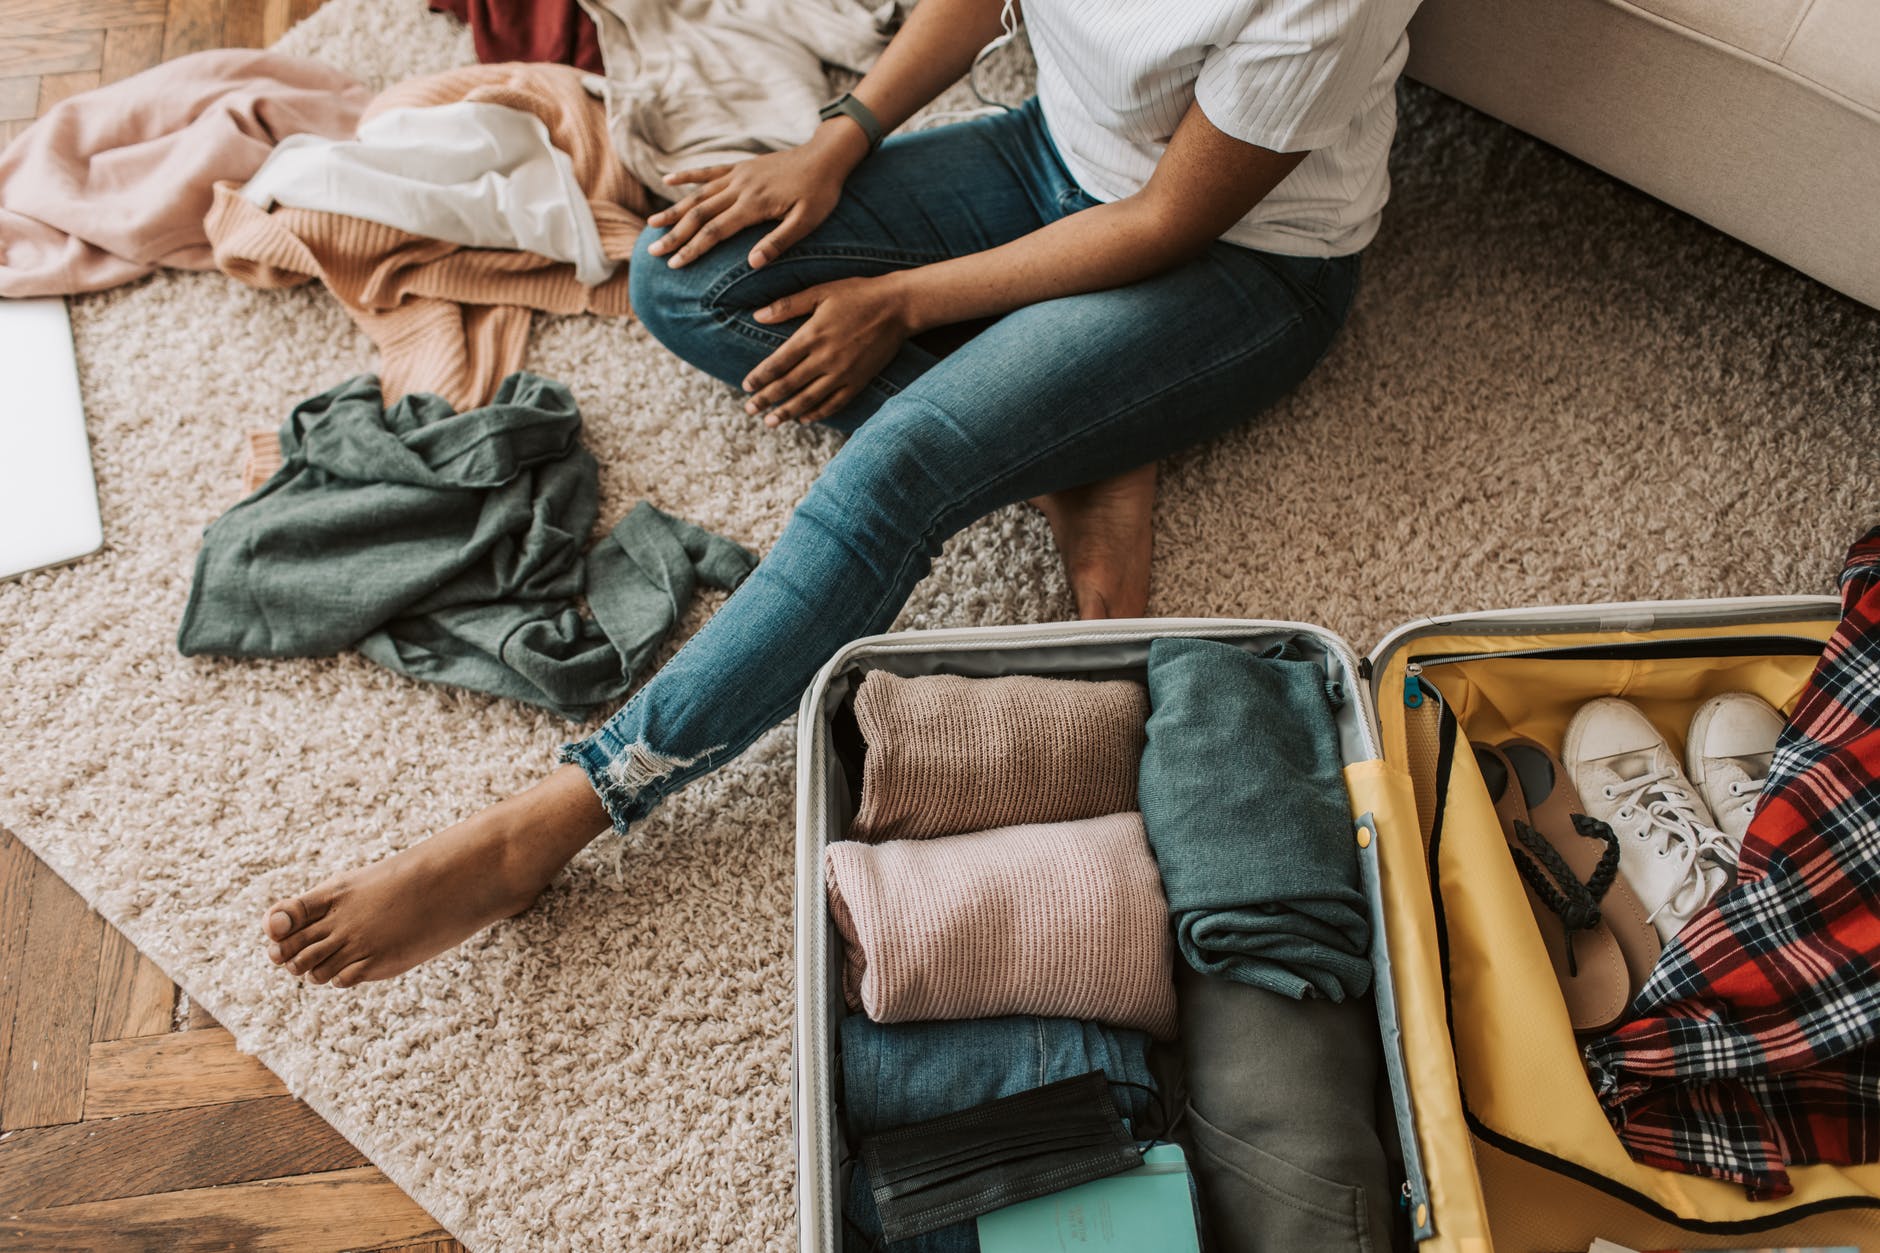 packing tips from Wanderess, book with women's travel tips